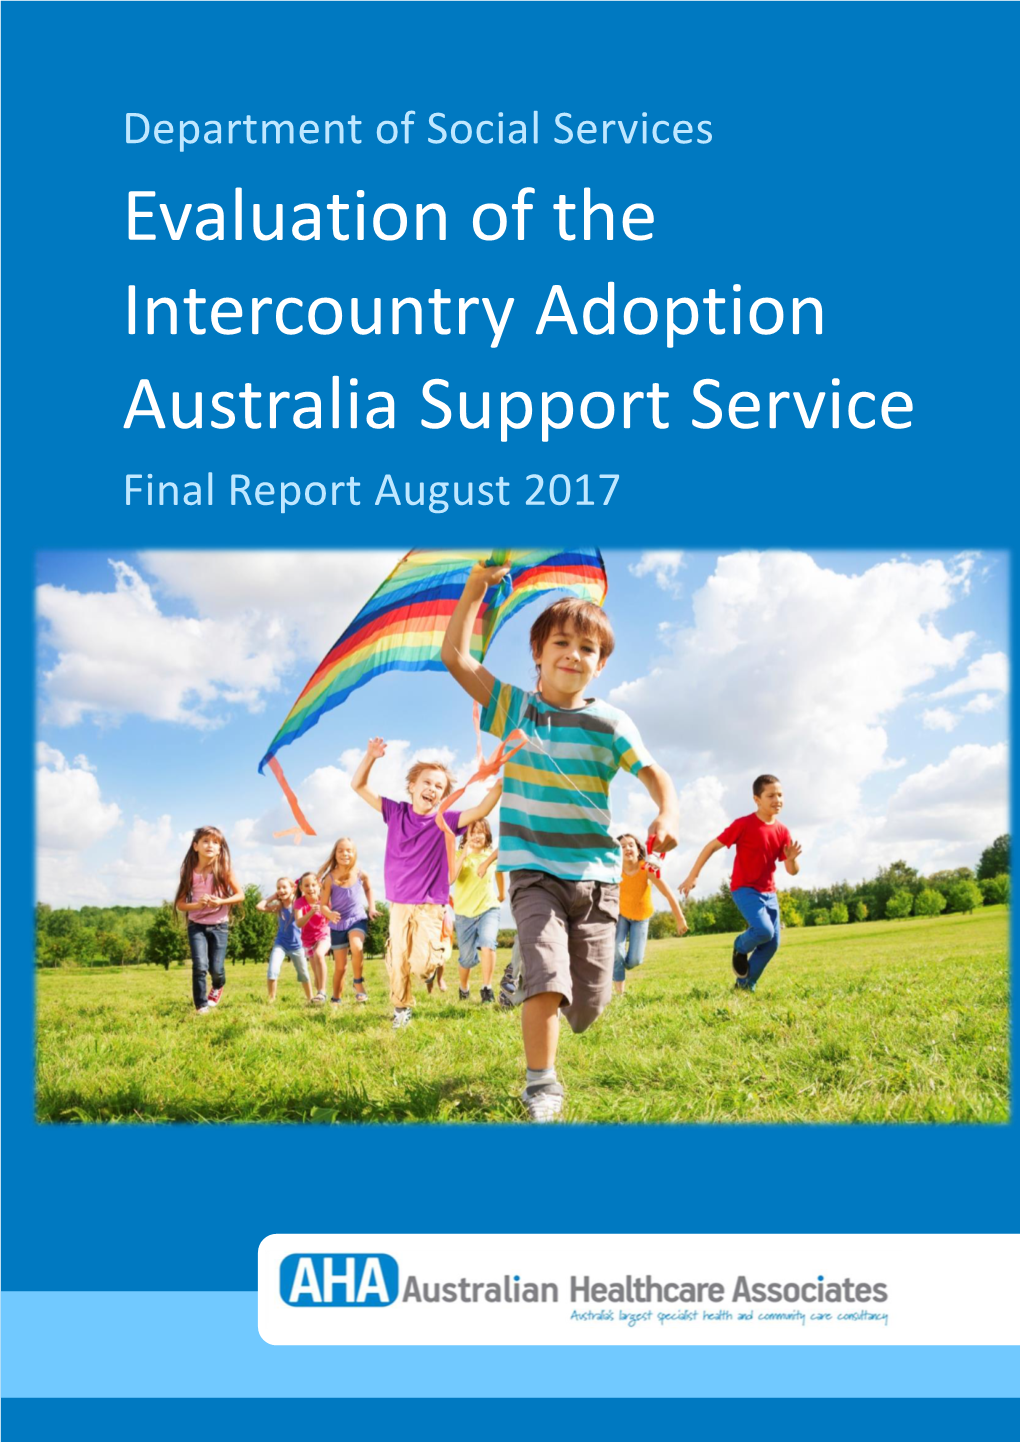 Evaluation of the Intercountry Adoption Australia Support Service Final Report August 2017